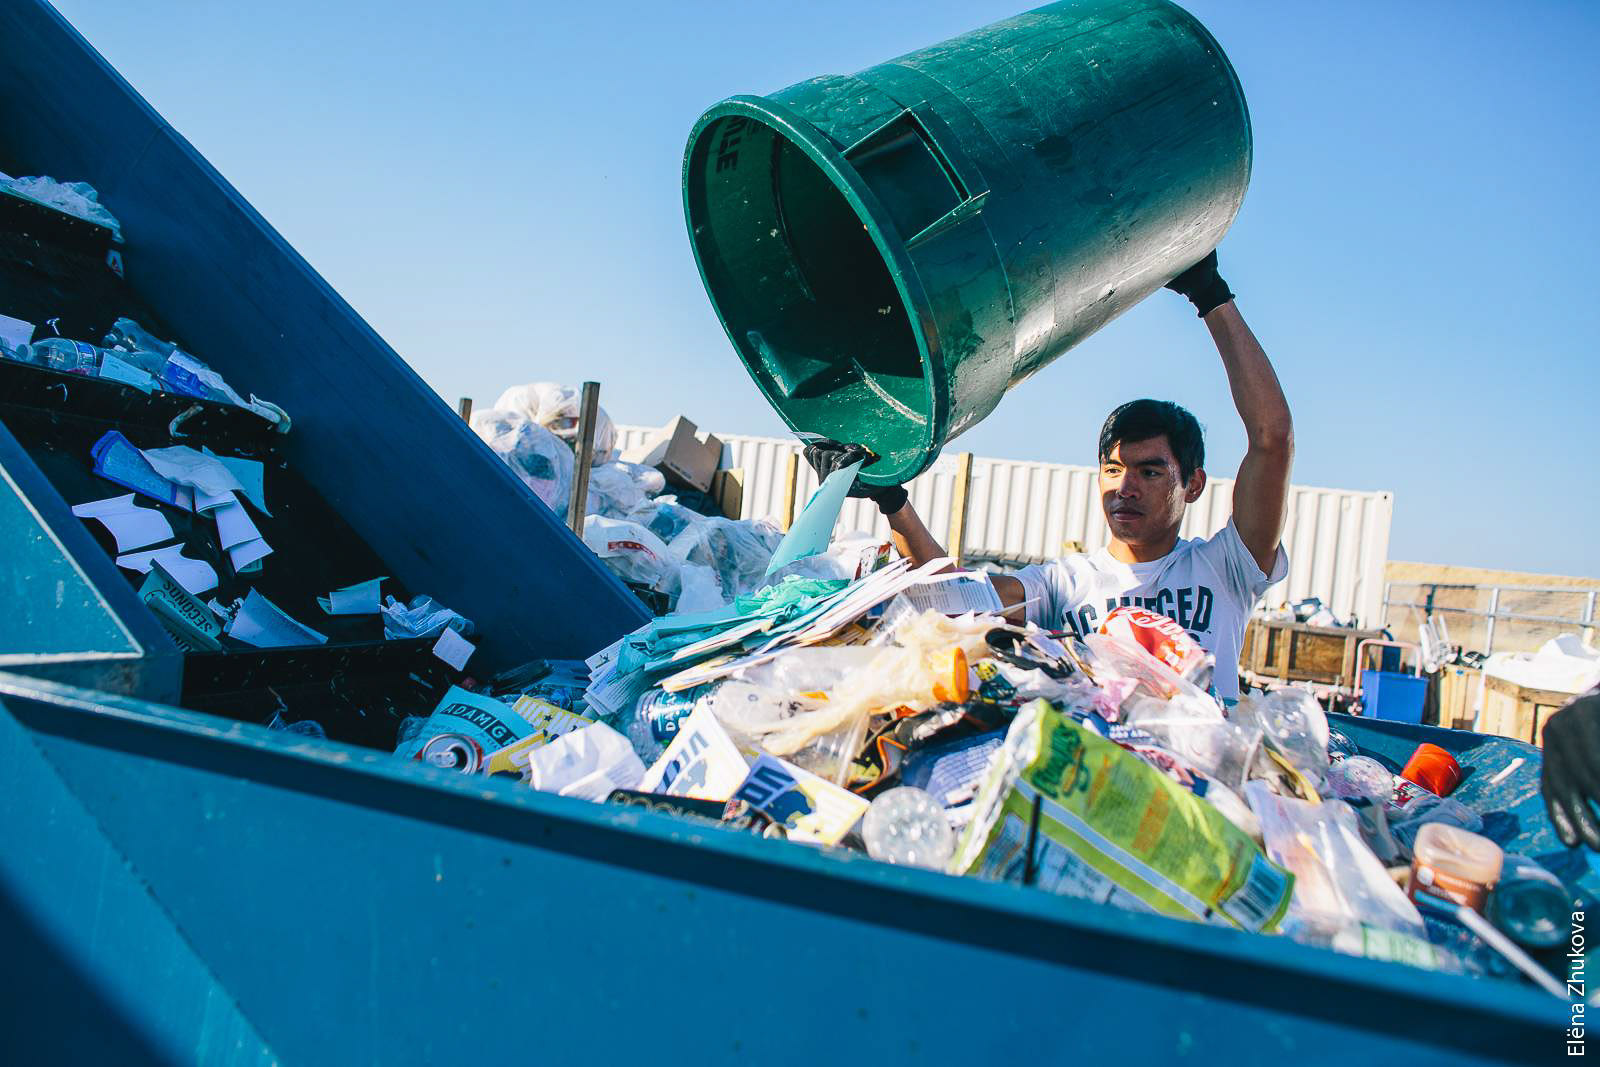 UC Merced student Andrew De Los Santos empties a campus waste bin into a hopper. A conveyor belt carries the materials to a sorting line for separation into recycling, compost and landfill channels.